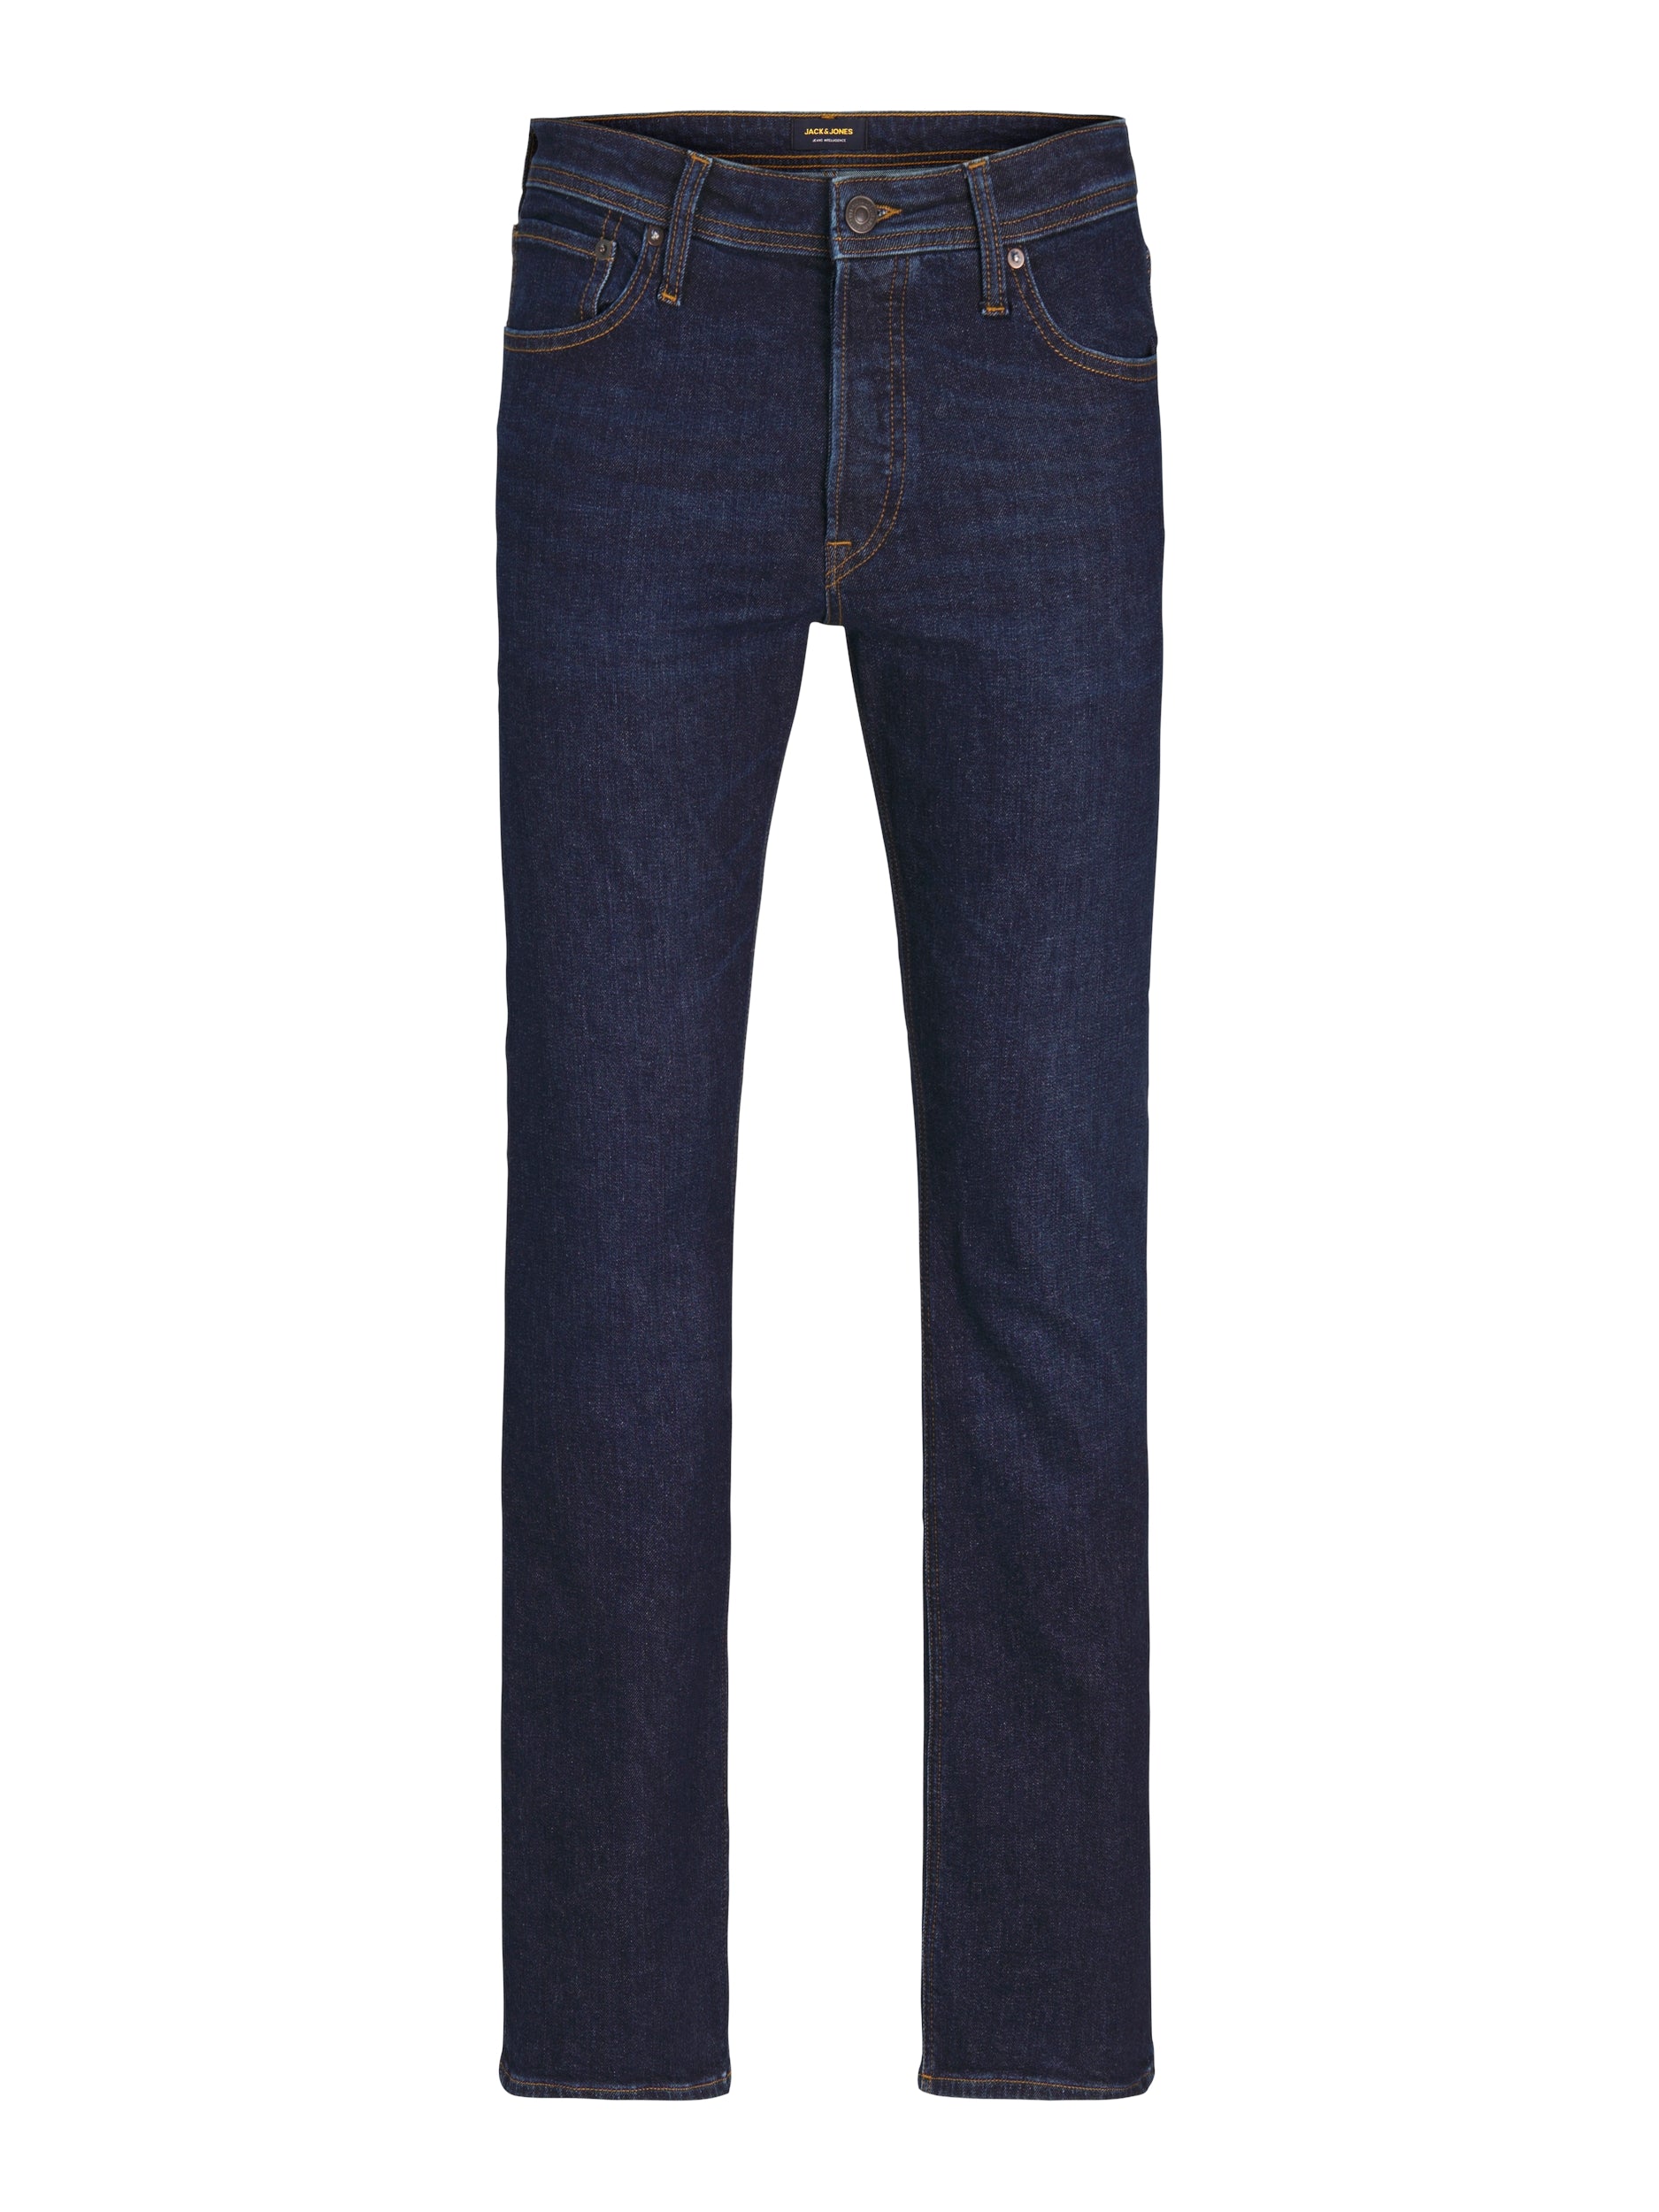 Buy Blue Low Rise Liam Skinny Jeans for Men